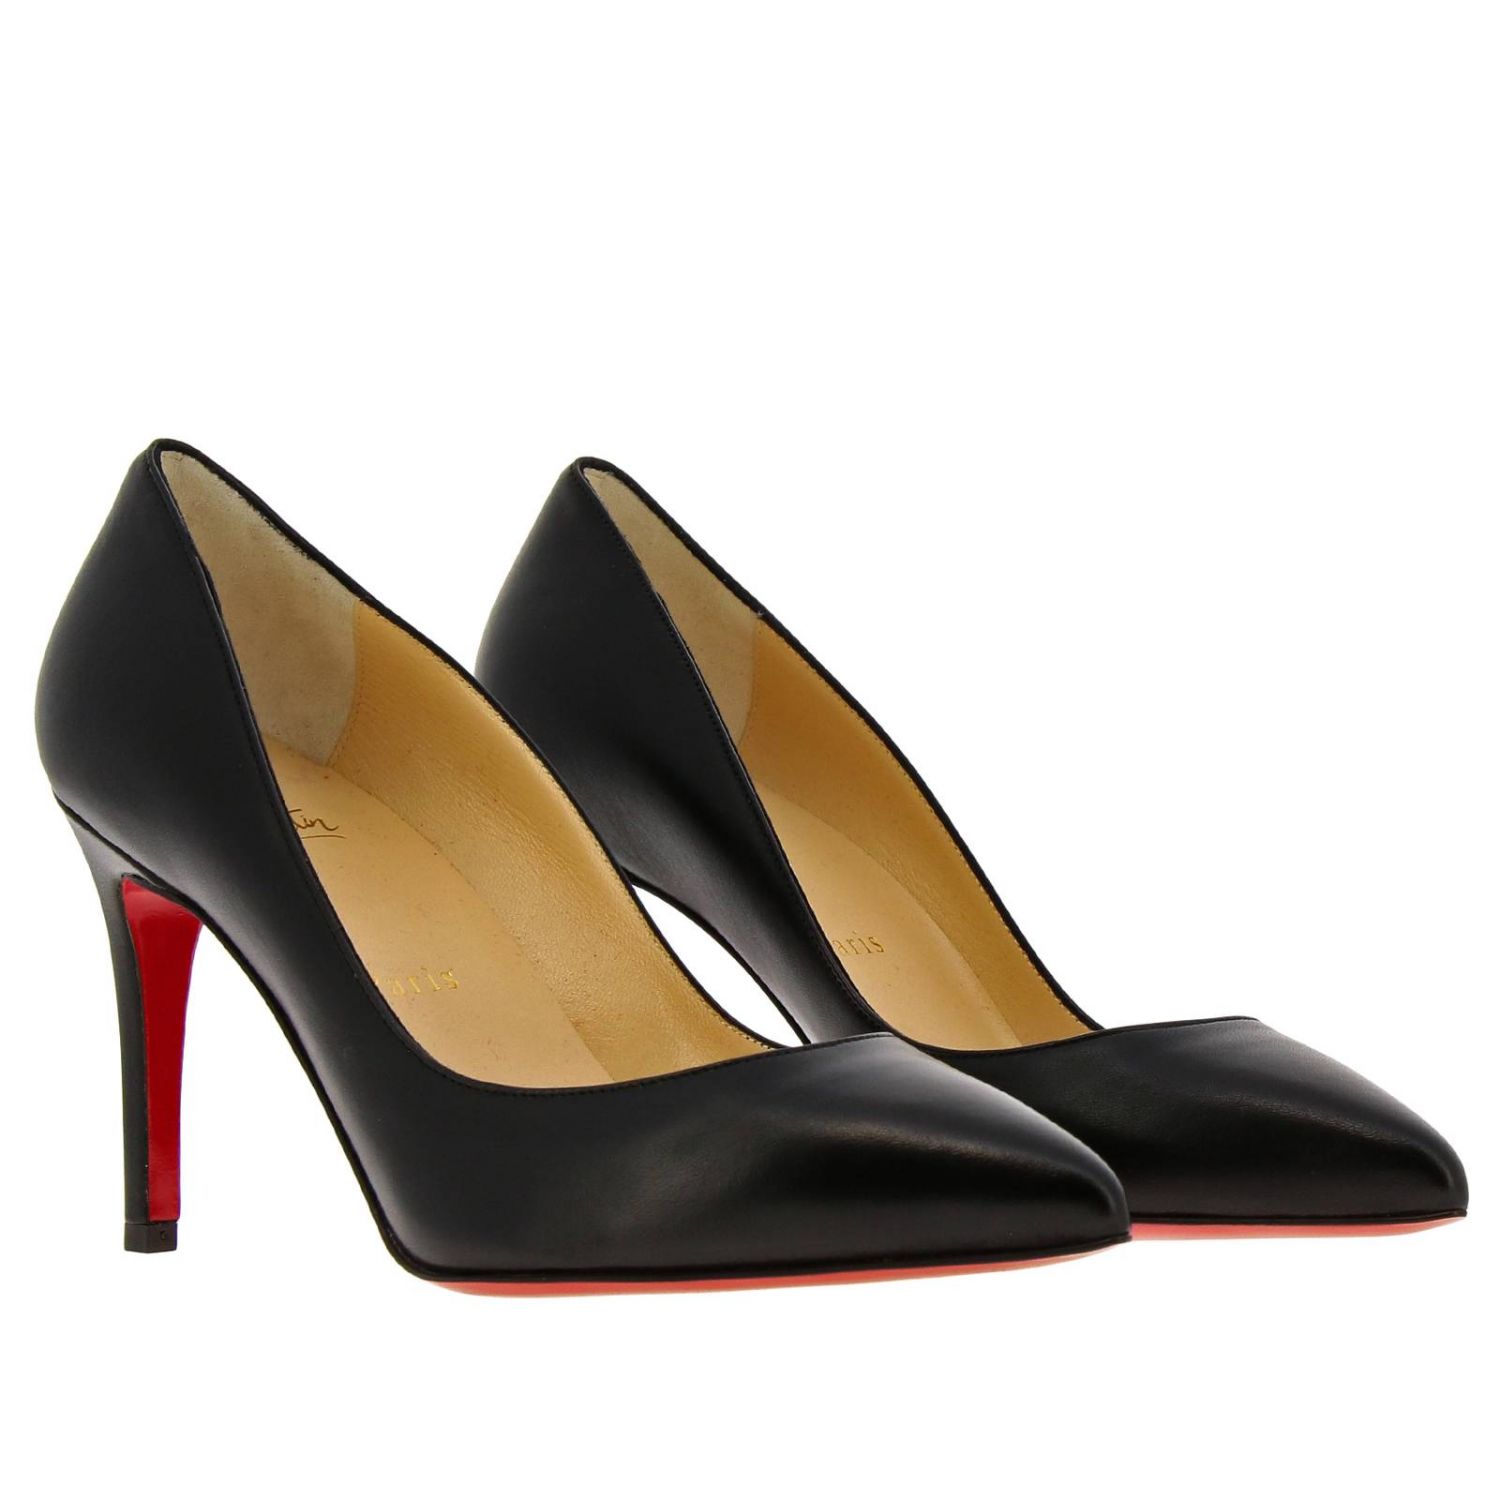 Pigalle Christian Louboutin décolleté in shiny nappa leather